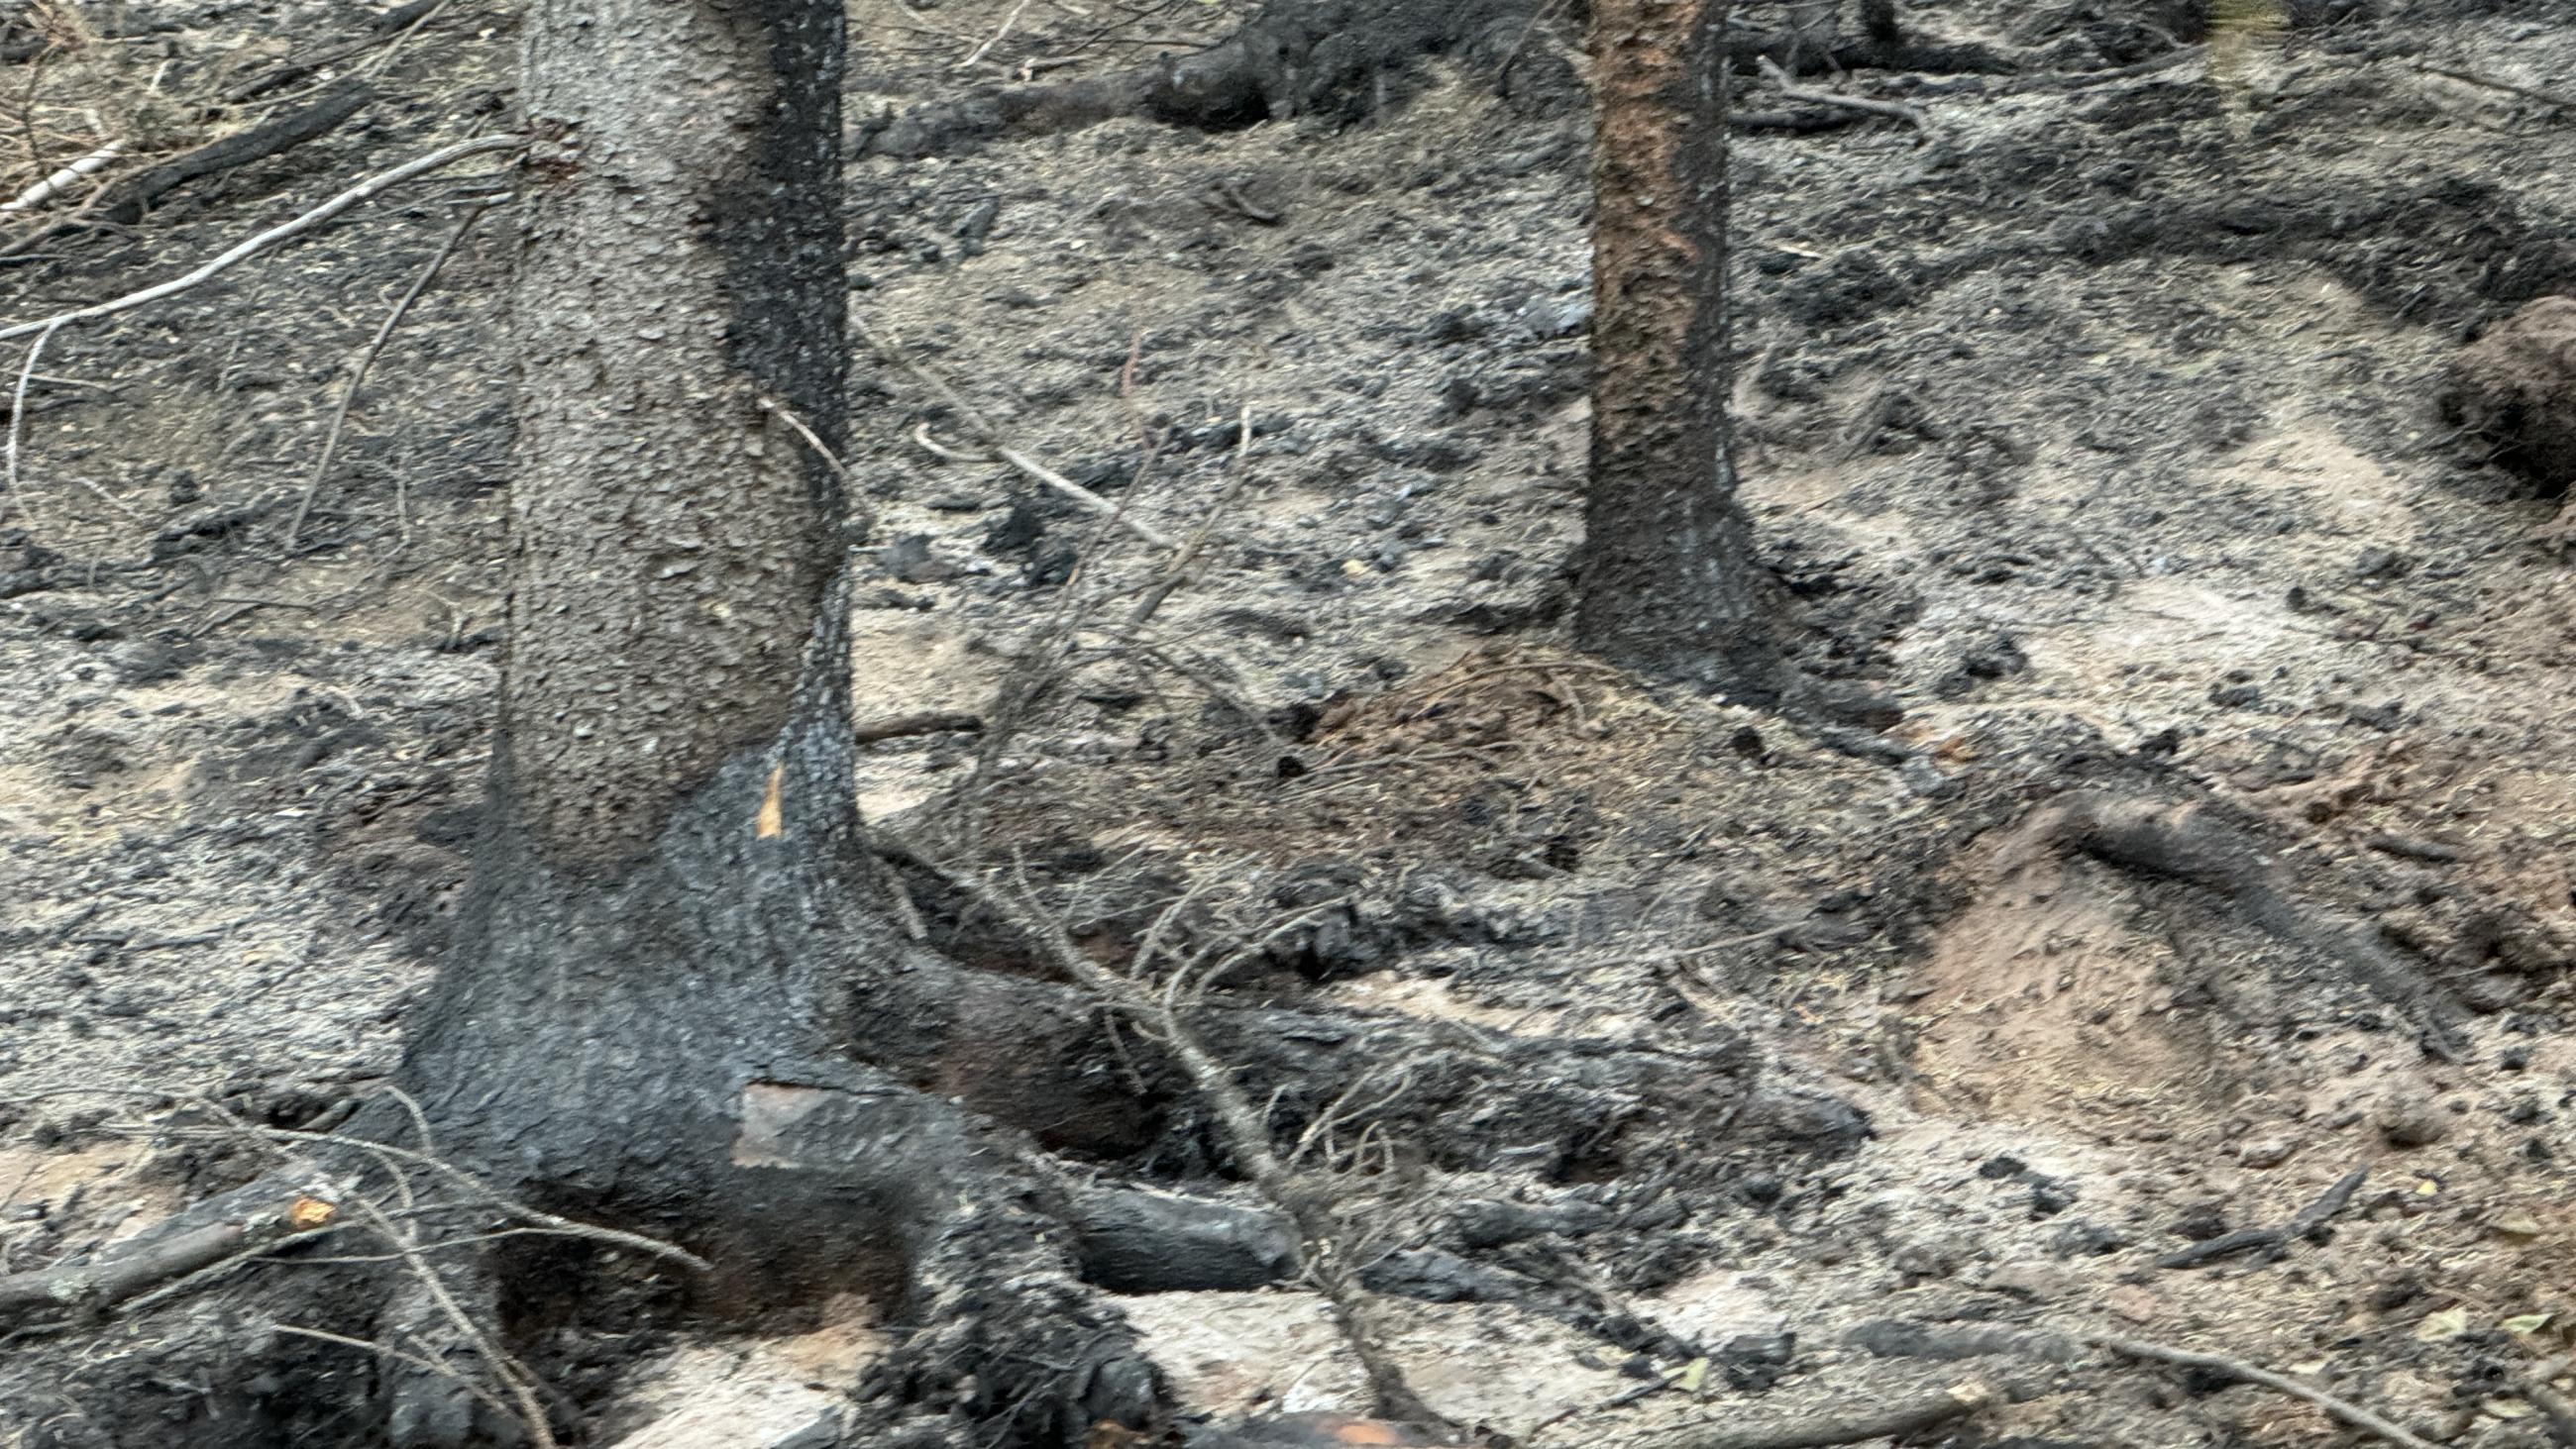 Tree roots are exposed after the fire burned hot under the trees.